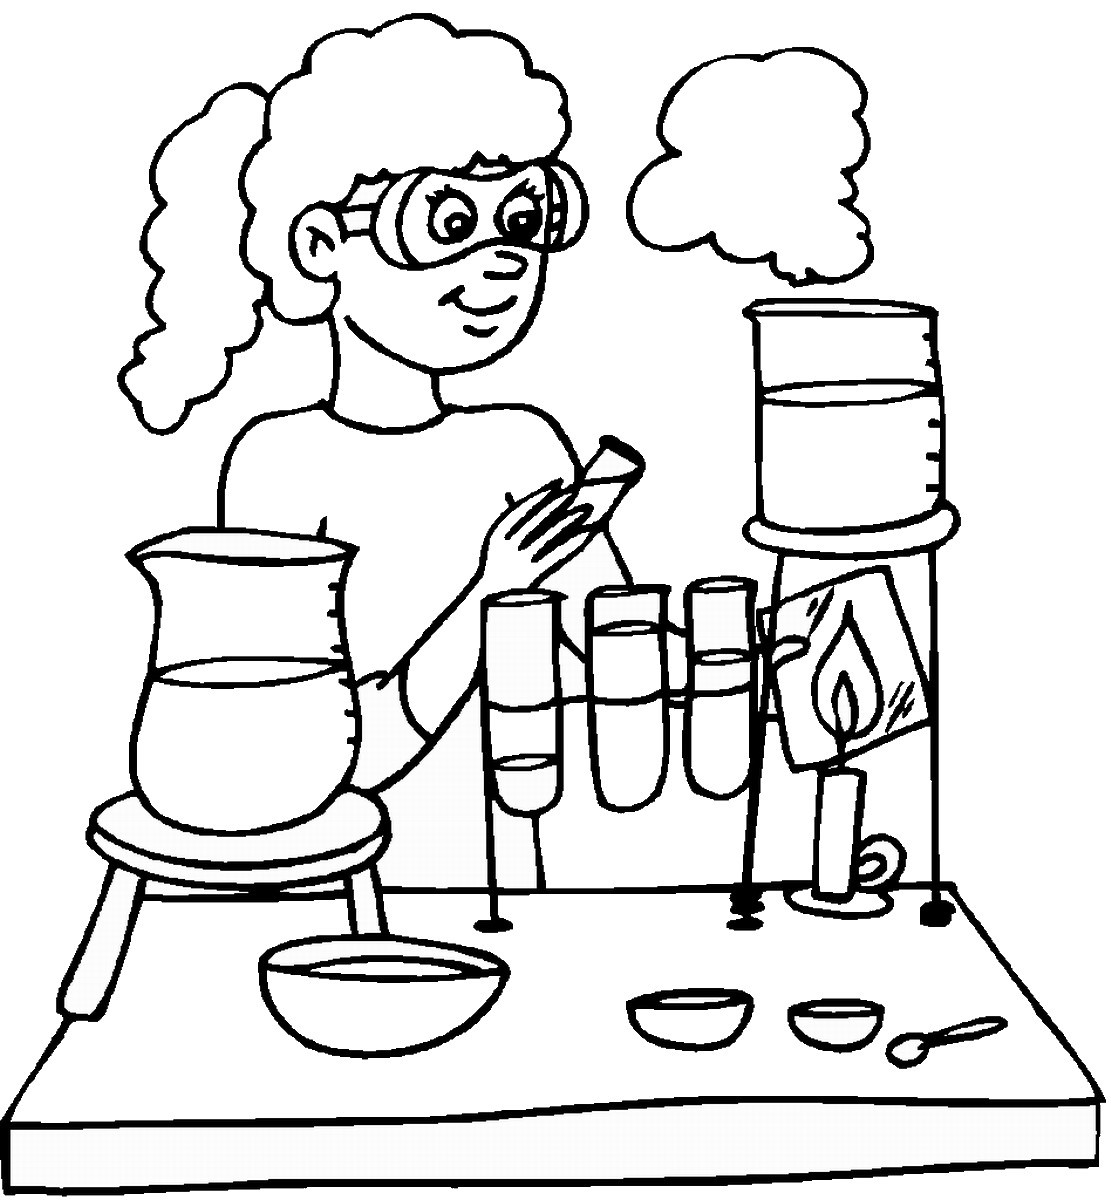 Scientist Coloring Sheet
 Science Coloring Pages